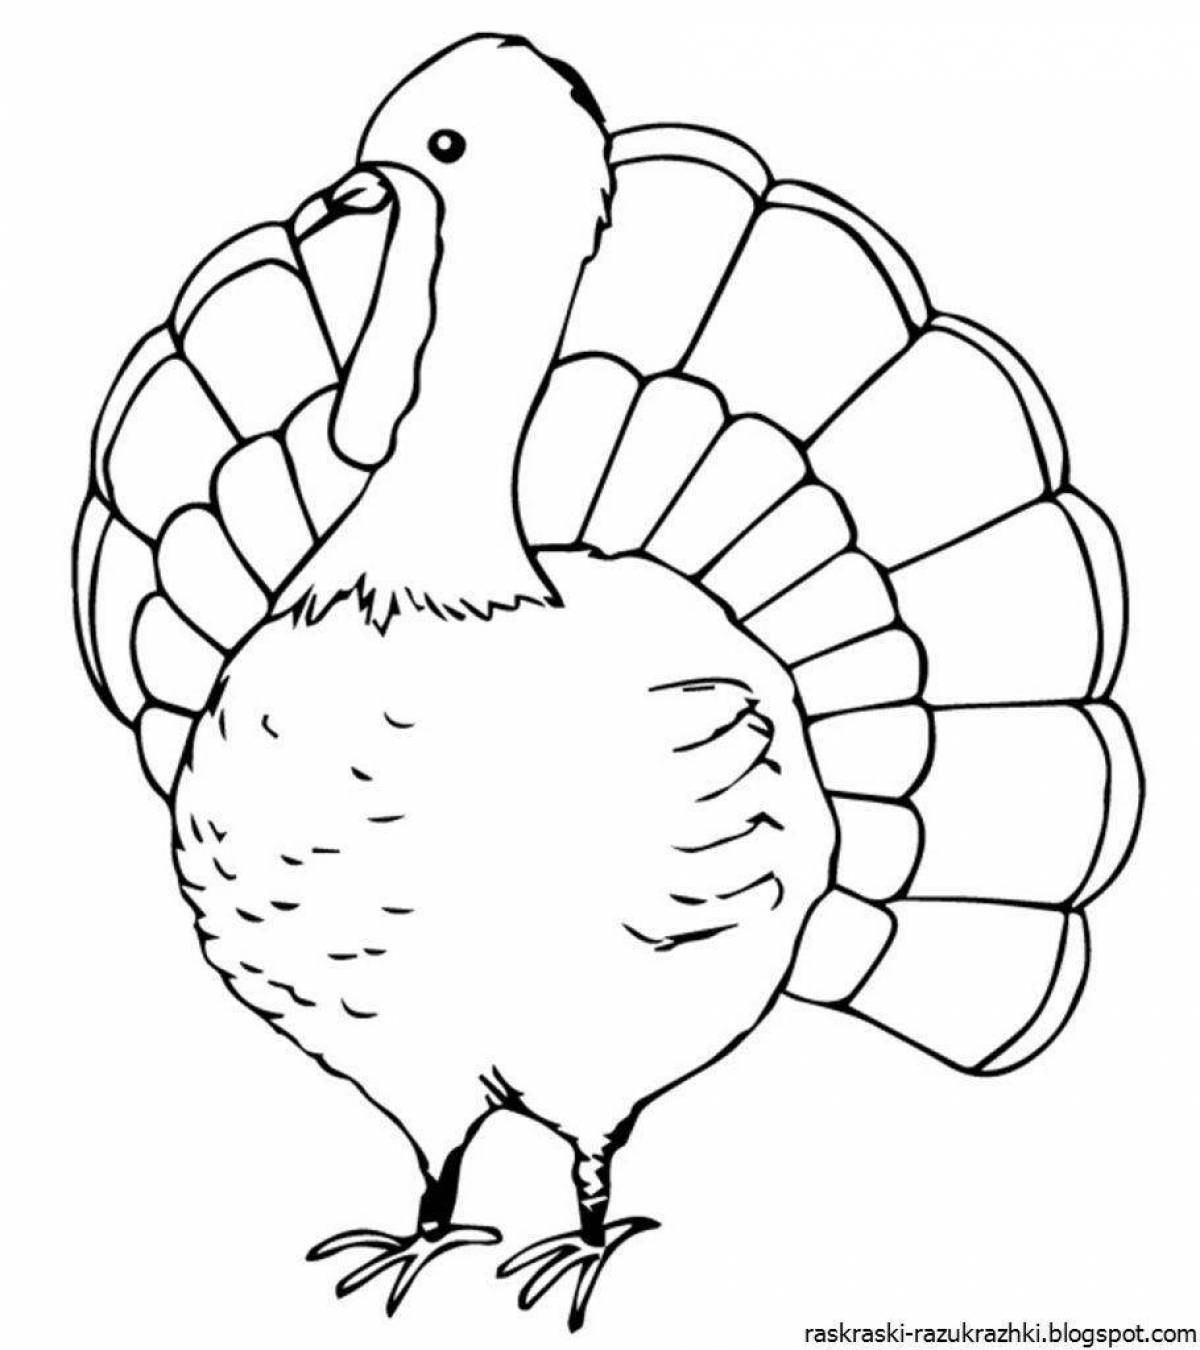 Playful turkey coloring book for kids